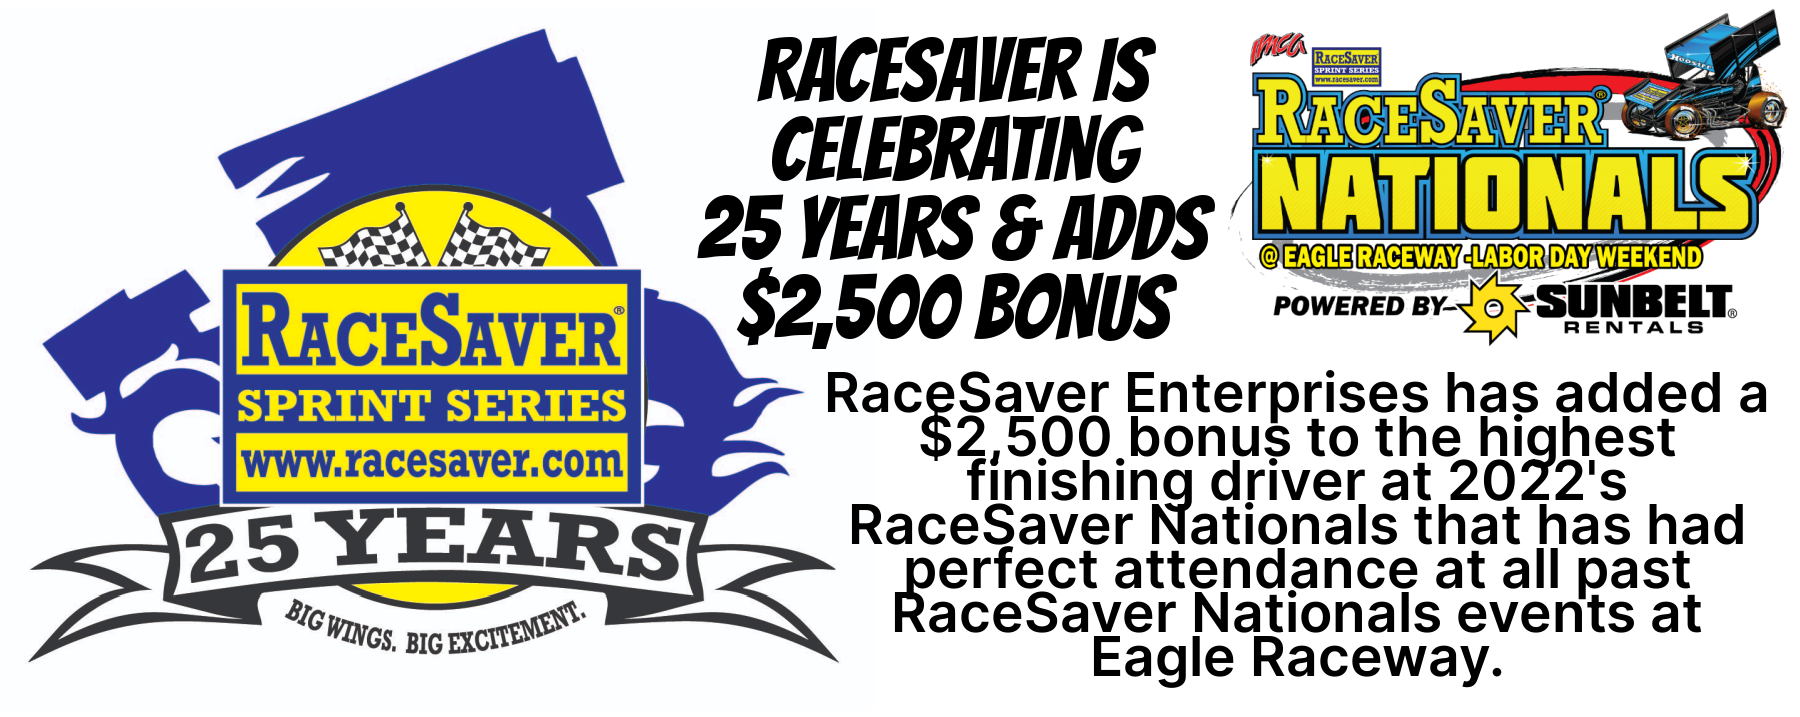 RaceSaver adds $2500 bonus at RaceSaver Nationals to the Highest finishing driver with perfect attendance